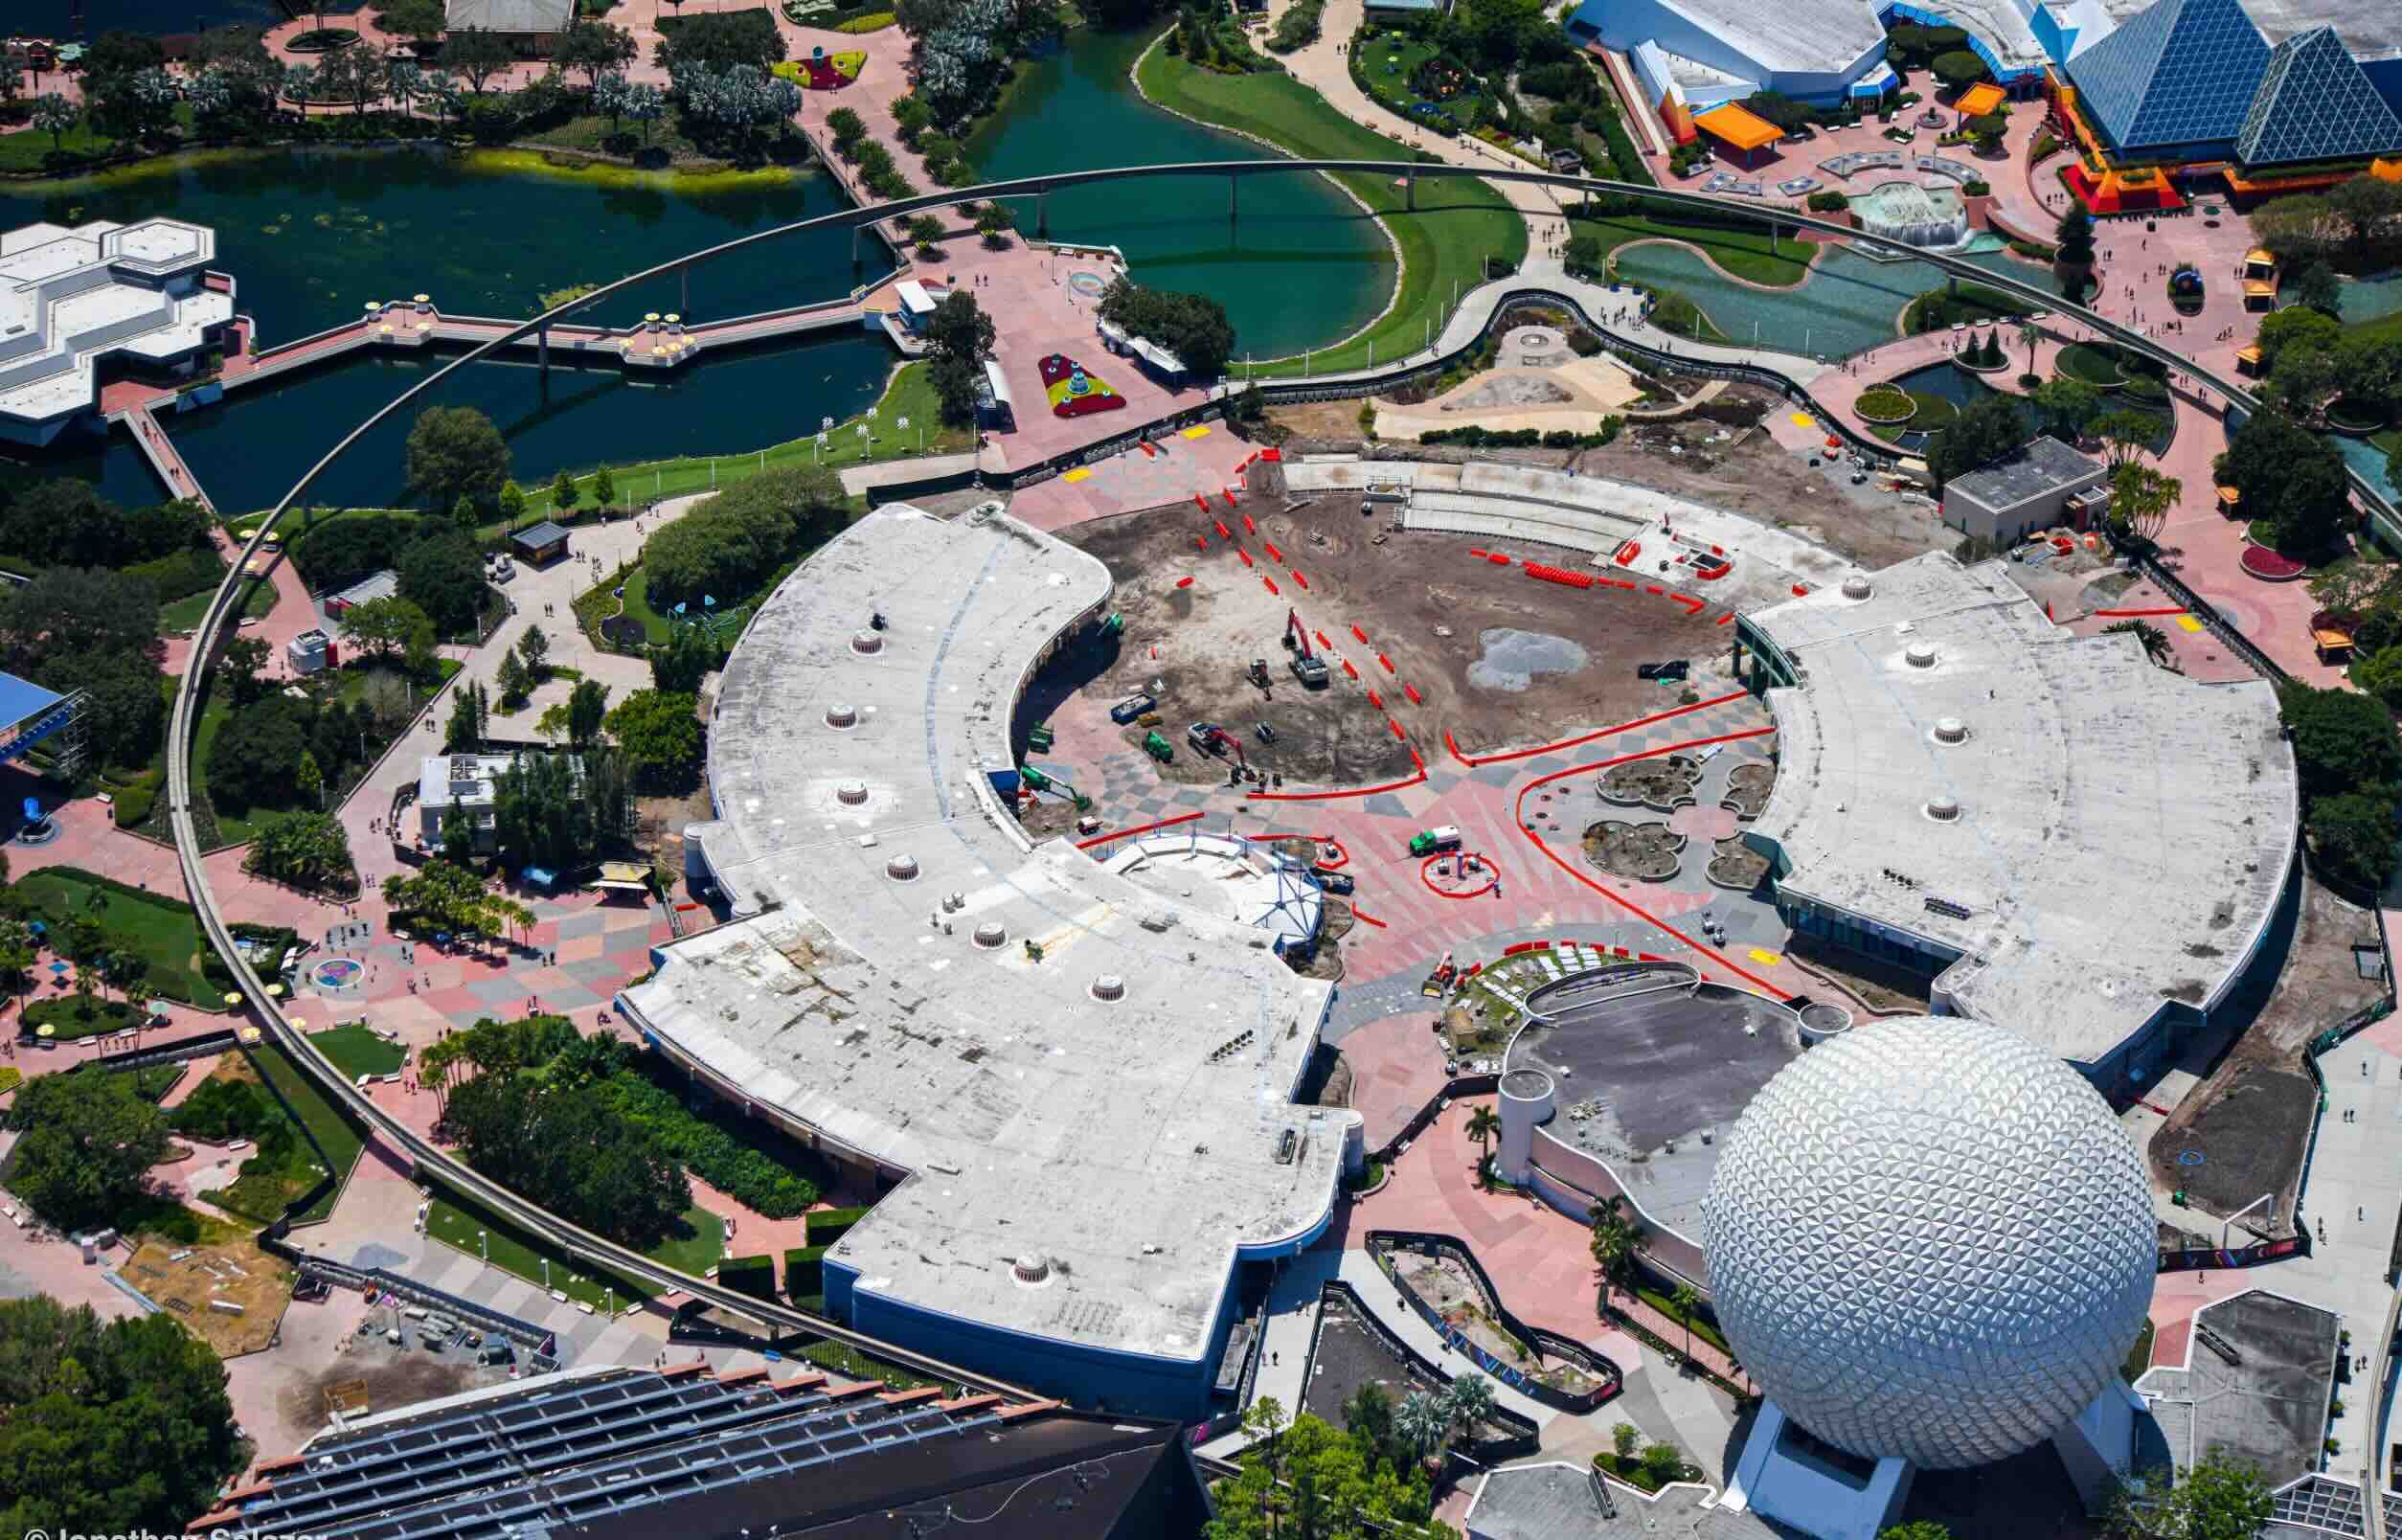 What Construction Is Going On At Epcot